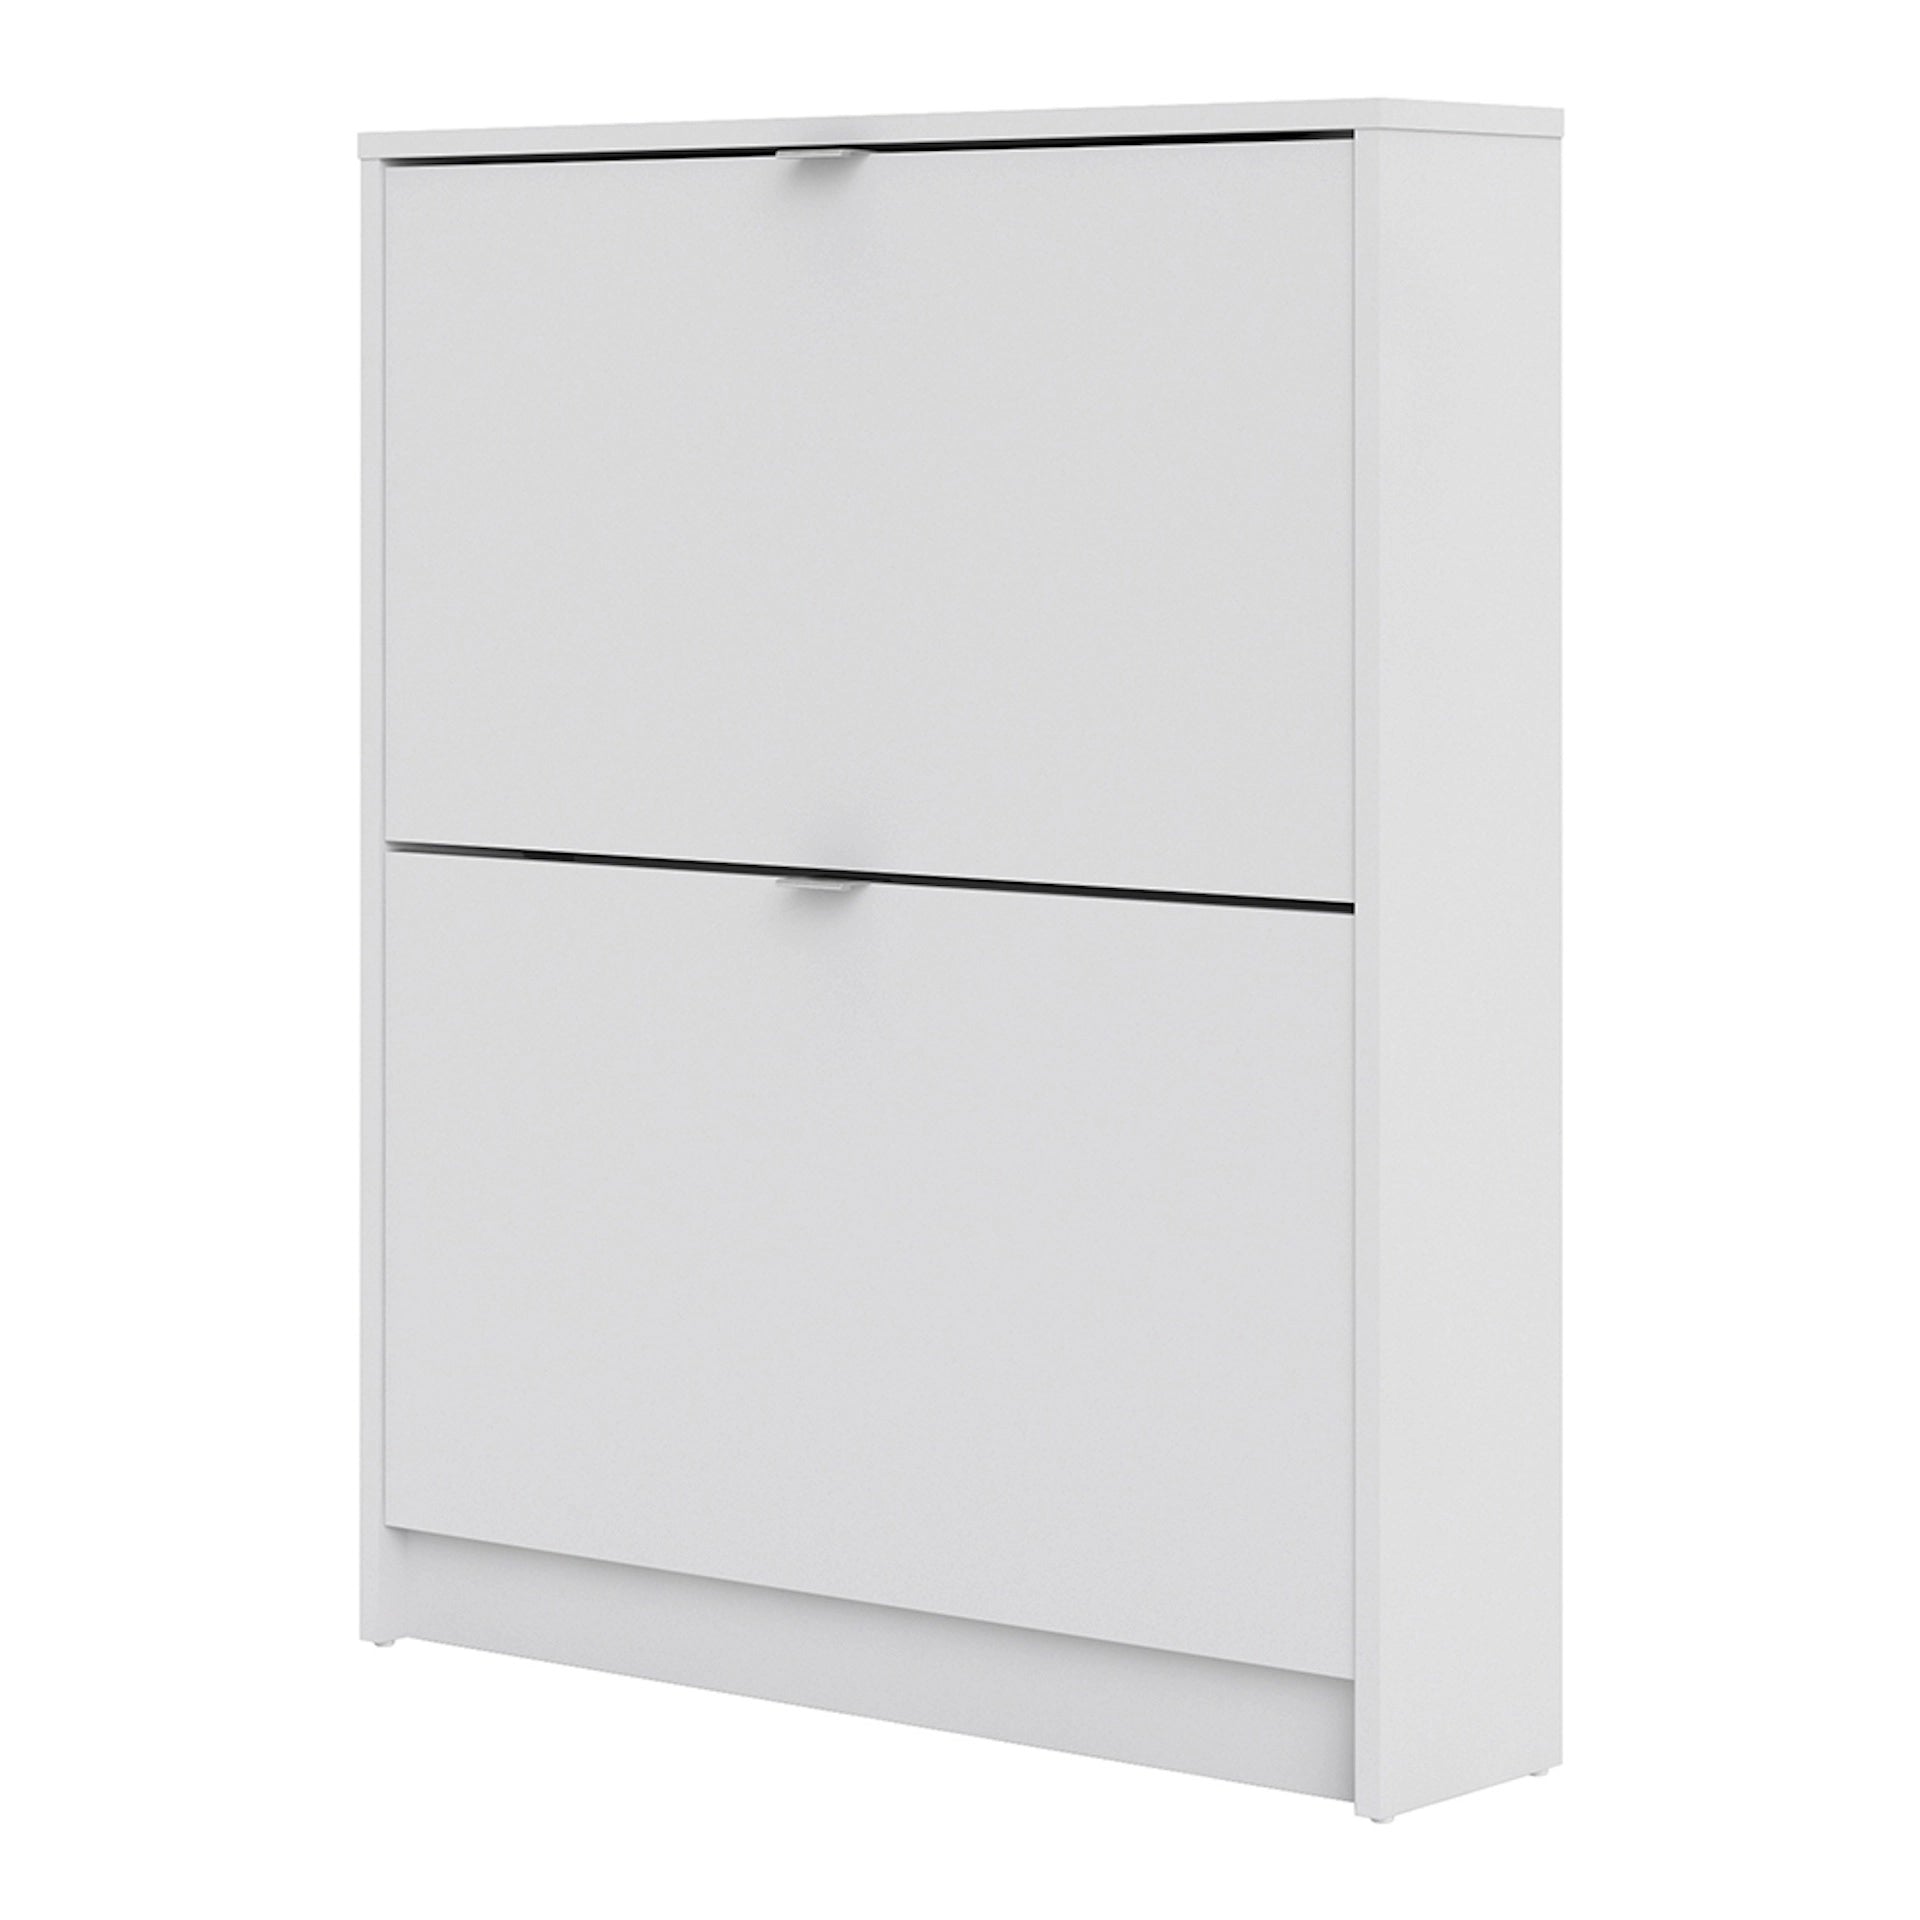 Furniture To Go Shoes Shoe Cabinet W. 2 Tilting Doors & 1 Layer in White